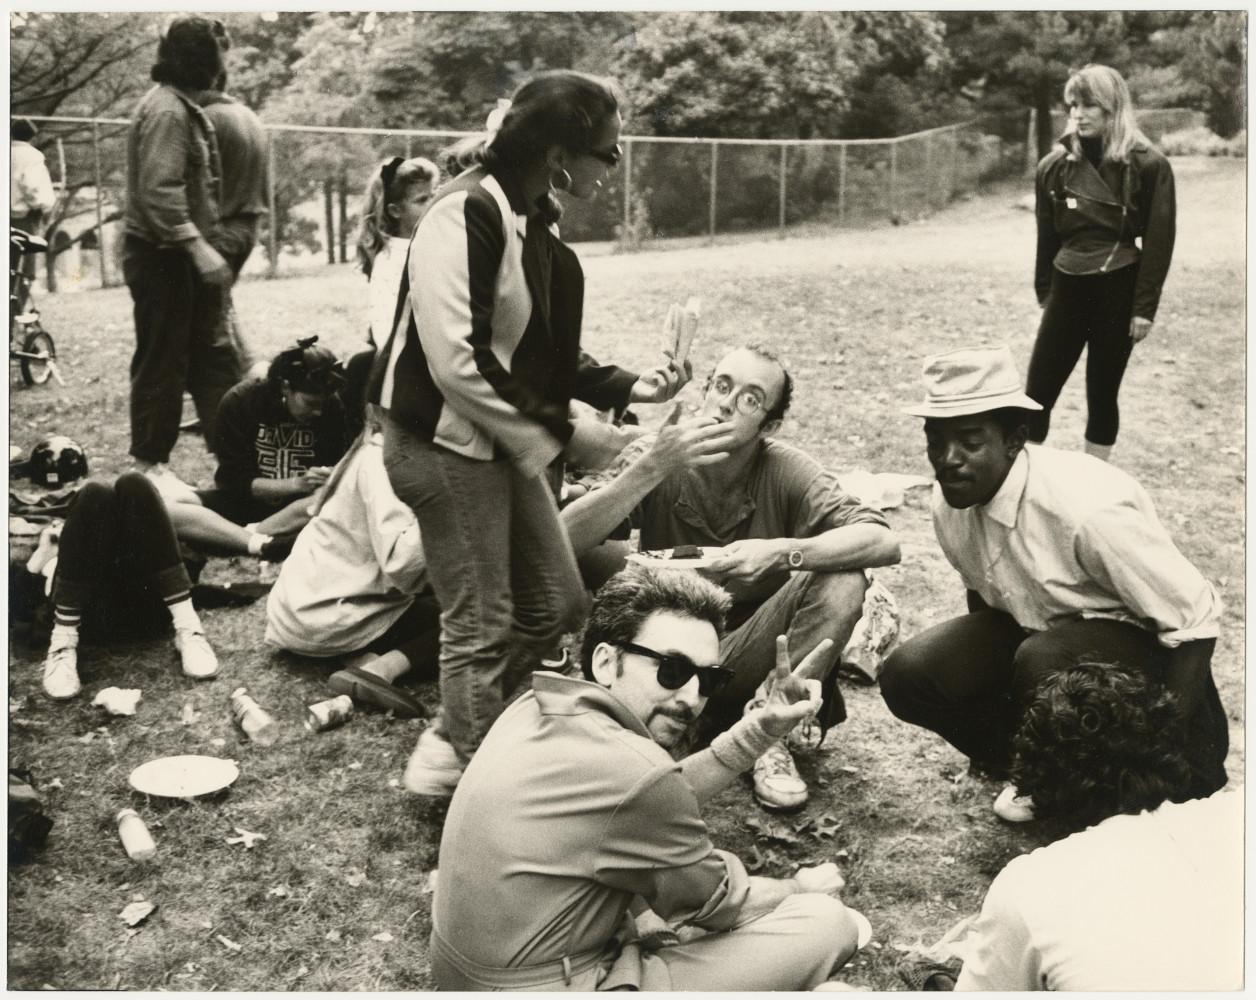 Andy Warhol Portrait Photograph - Keith Haring in Park with Friends